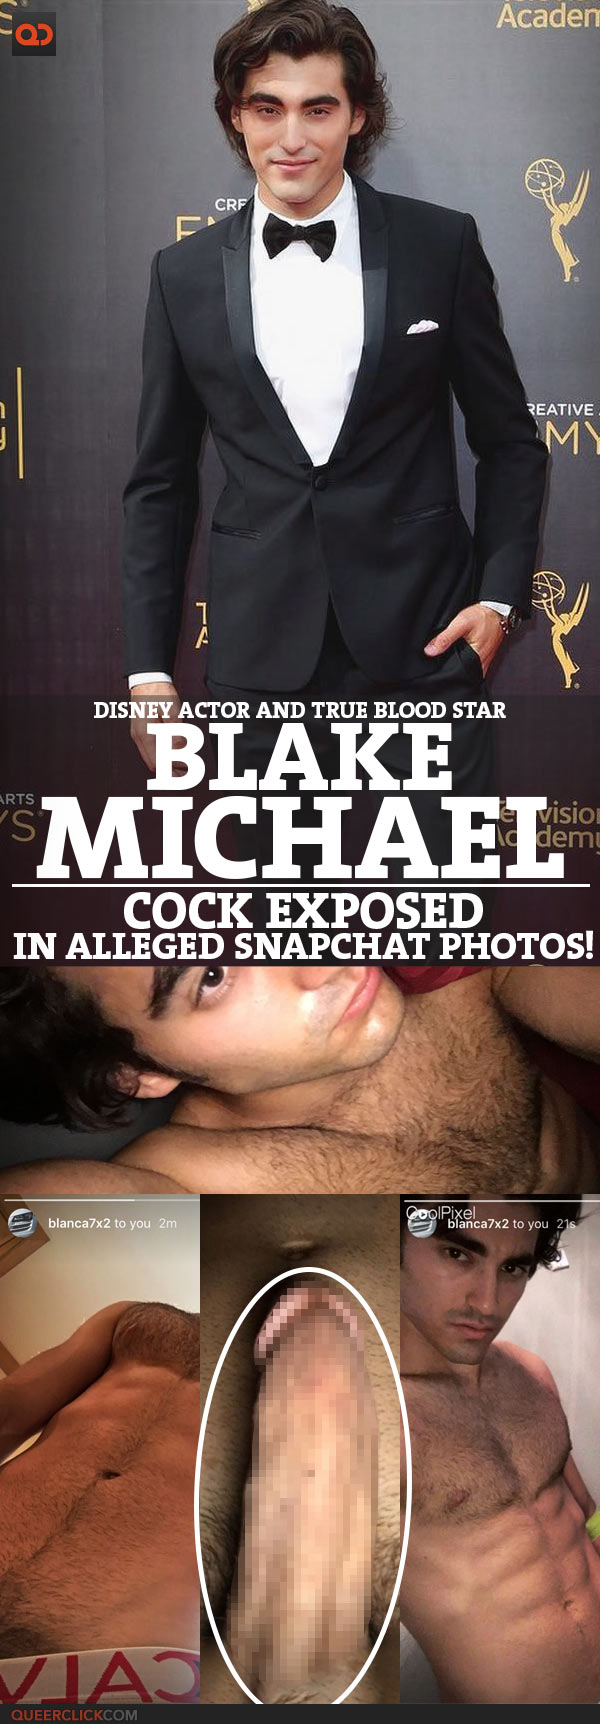 Blake Michael, Disney Actor And True Blood Star, Cock Exposed In Alleged Snapchat Photos!